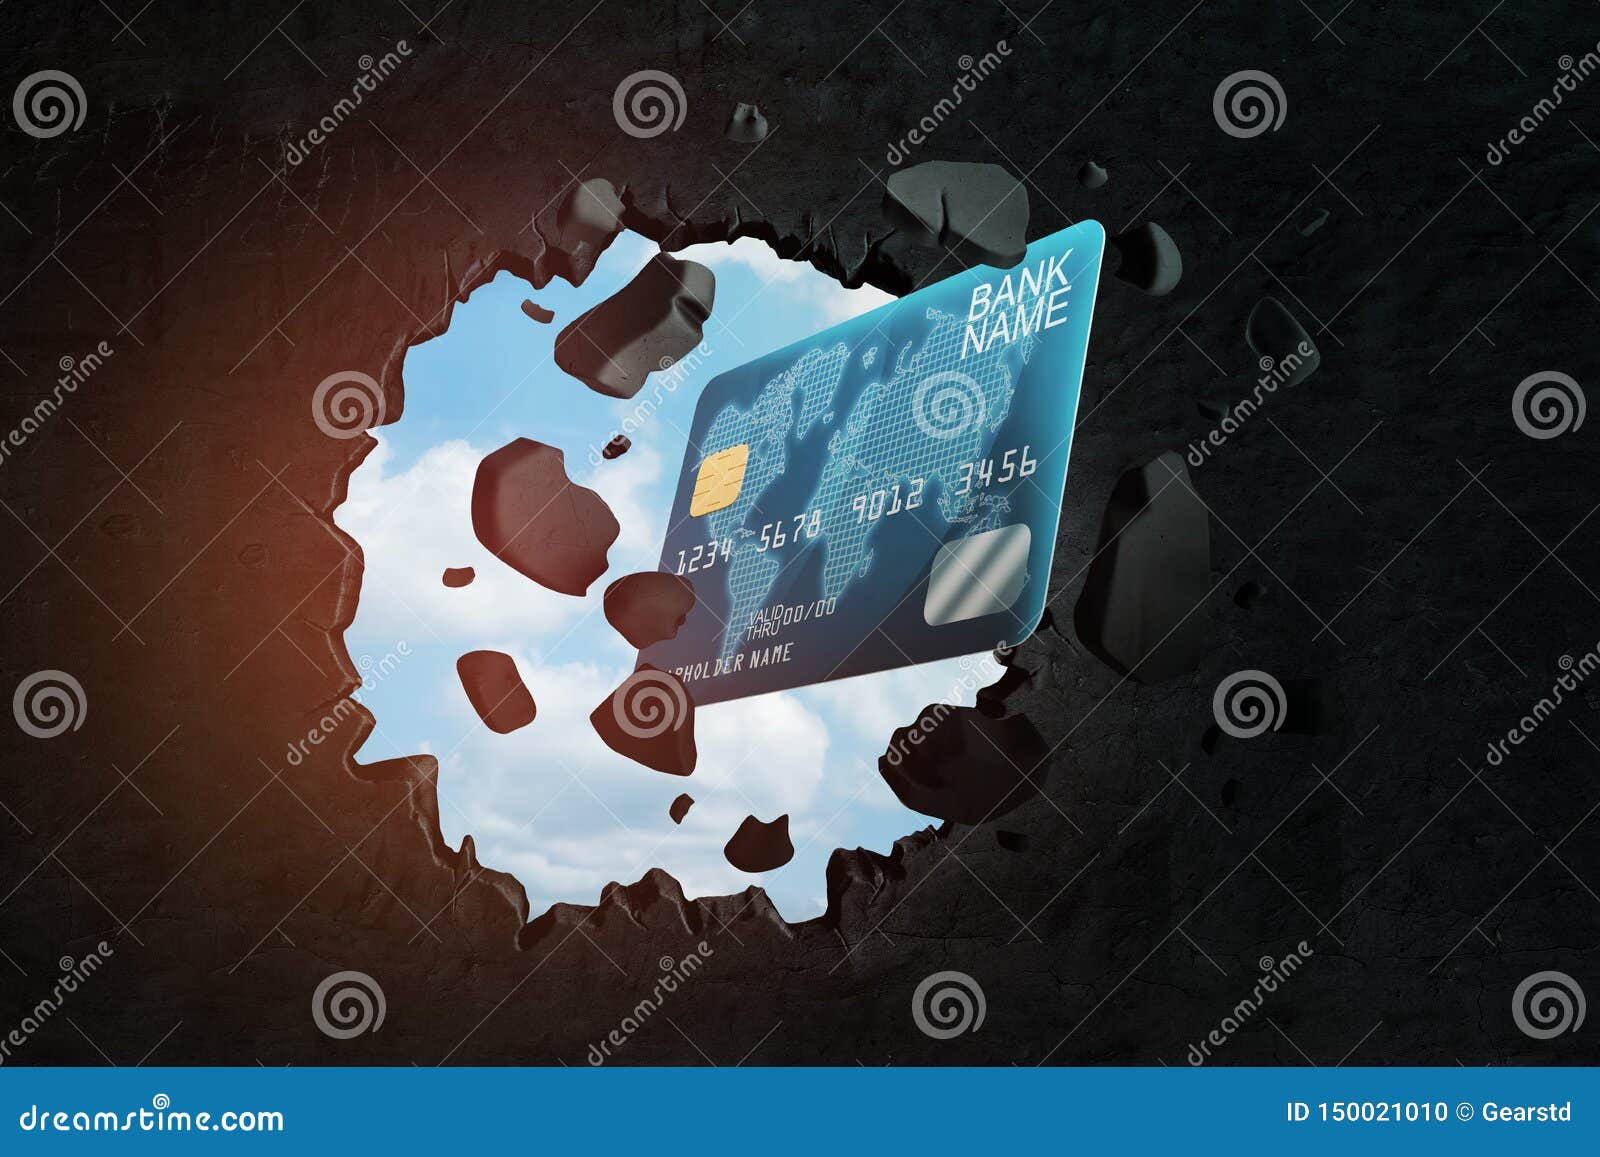 3d Closeup Rendering Of Blue Plastic Credit Card Breaking Hole In Black Wall With Blue Sky Seen Through Hole Stock Illustration Illustration Of Financial Card 150021010